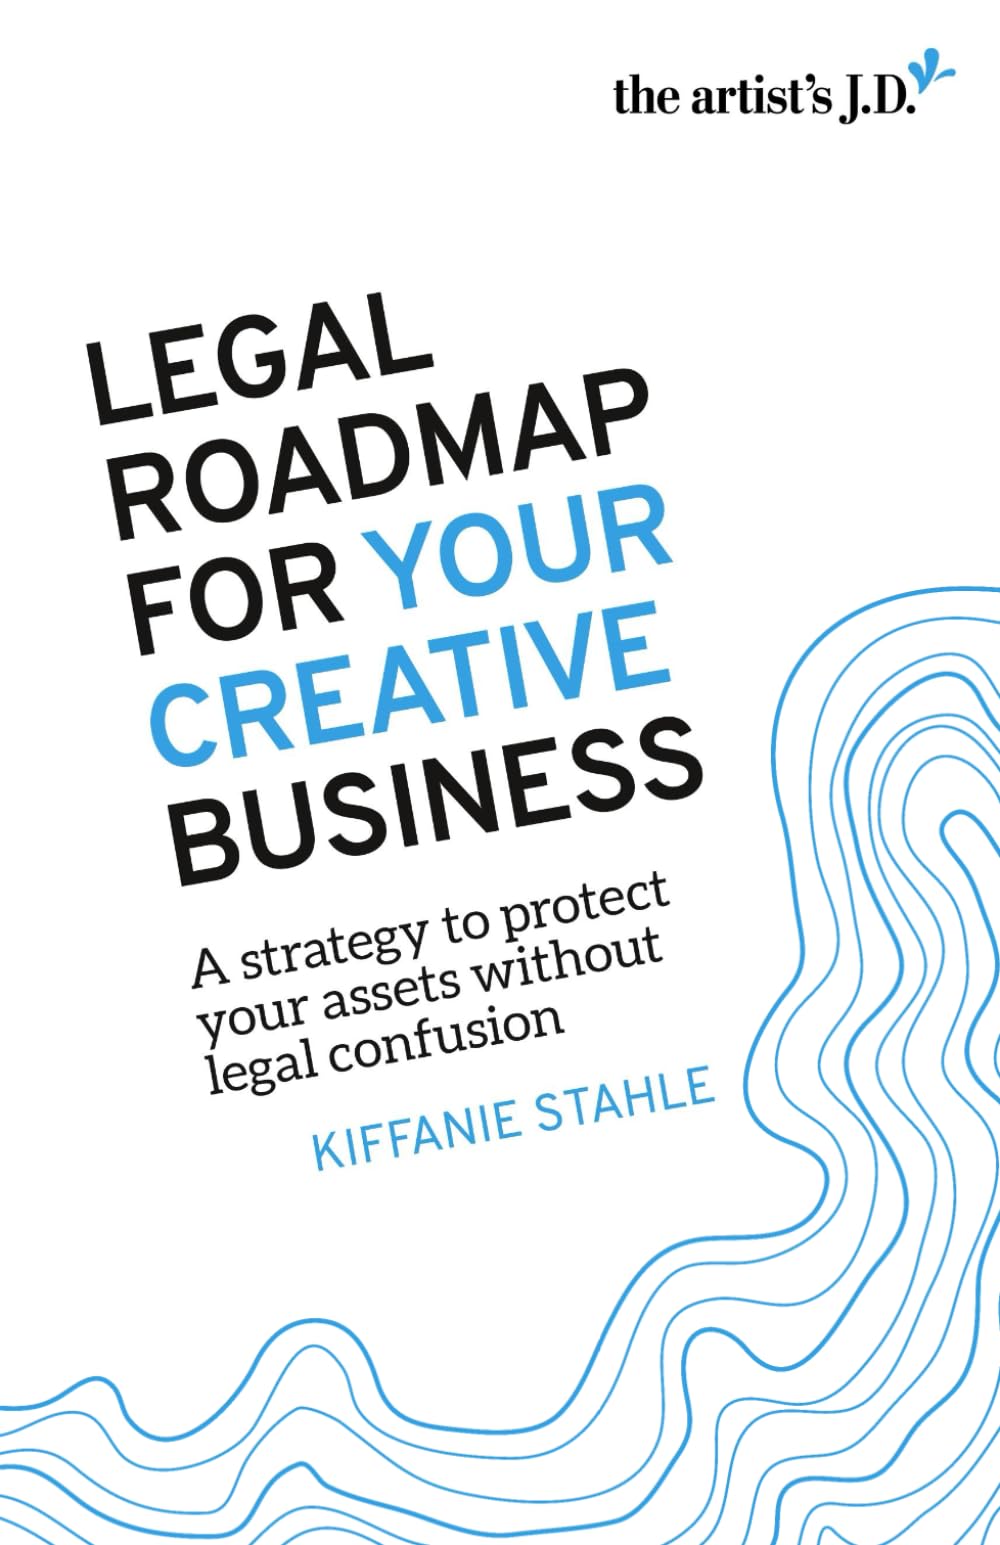 Legal Roadmap for your Creative Business: A strategy to protect your assets without legal confusion